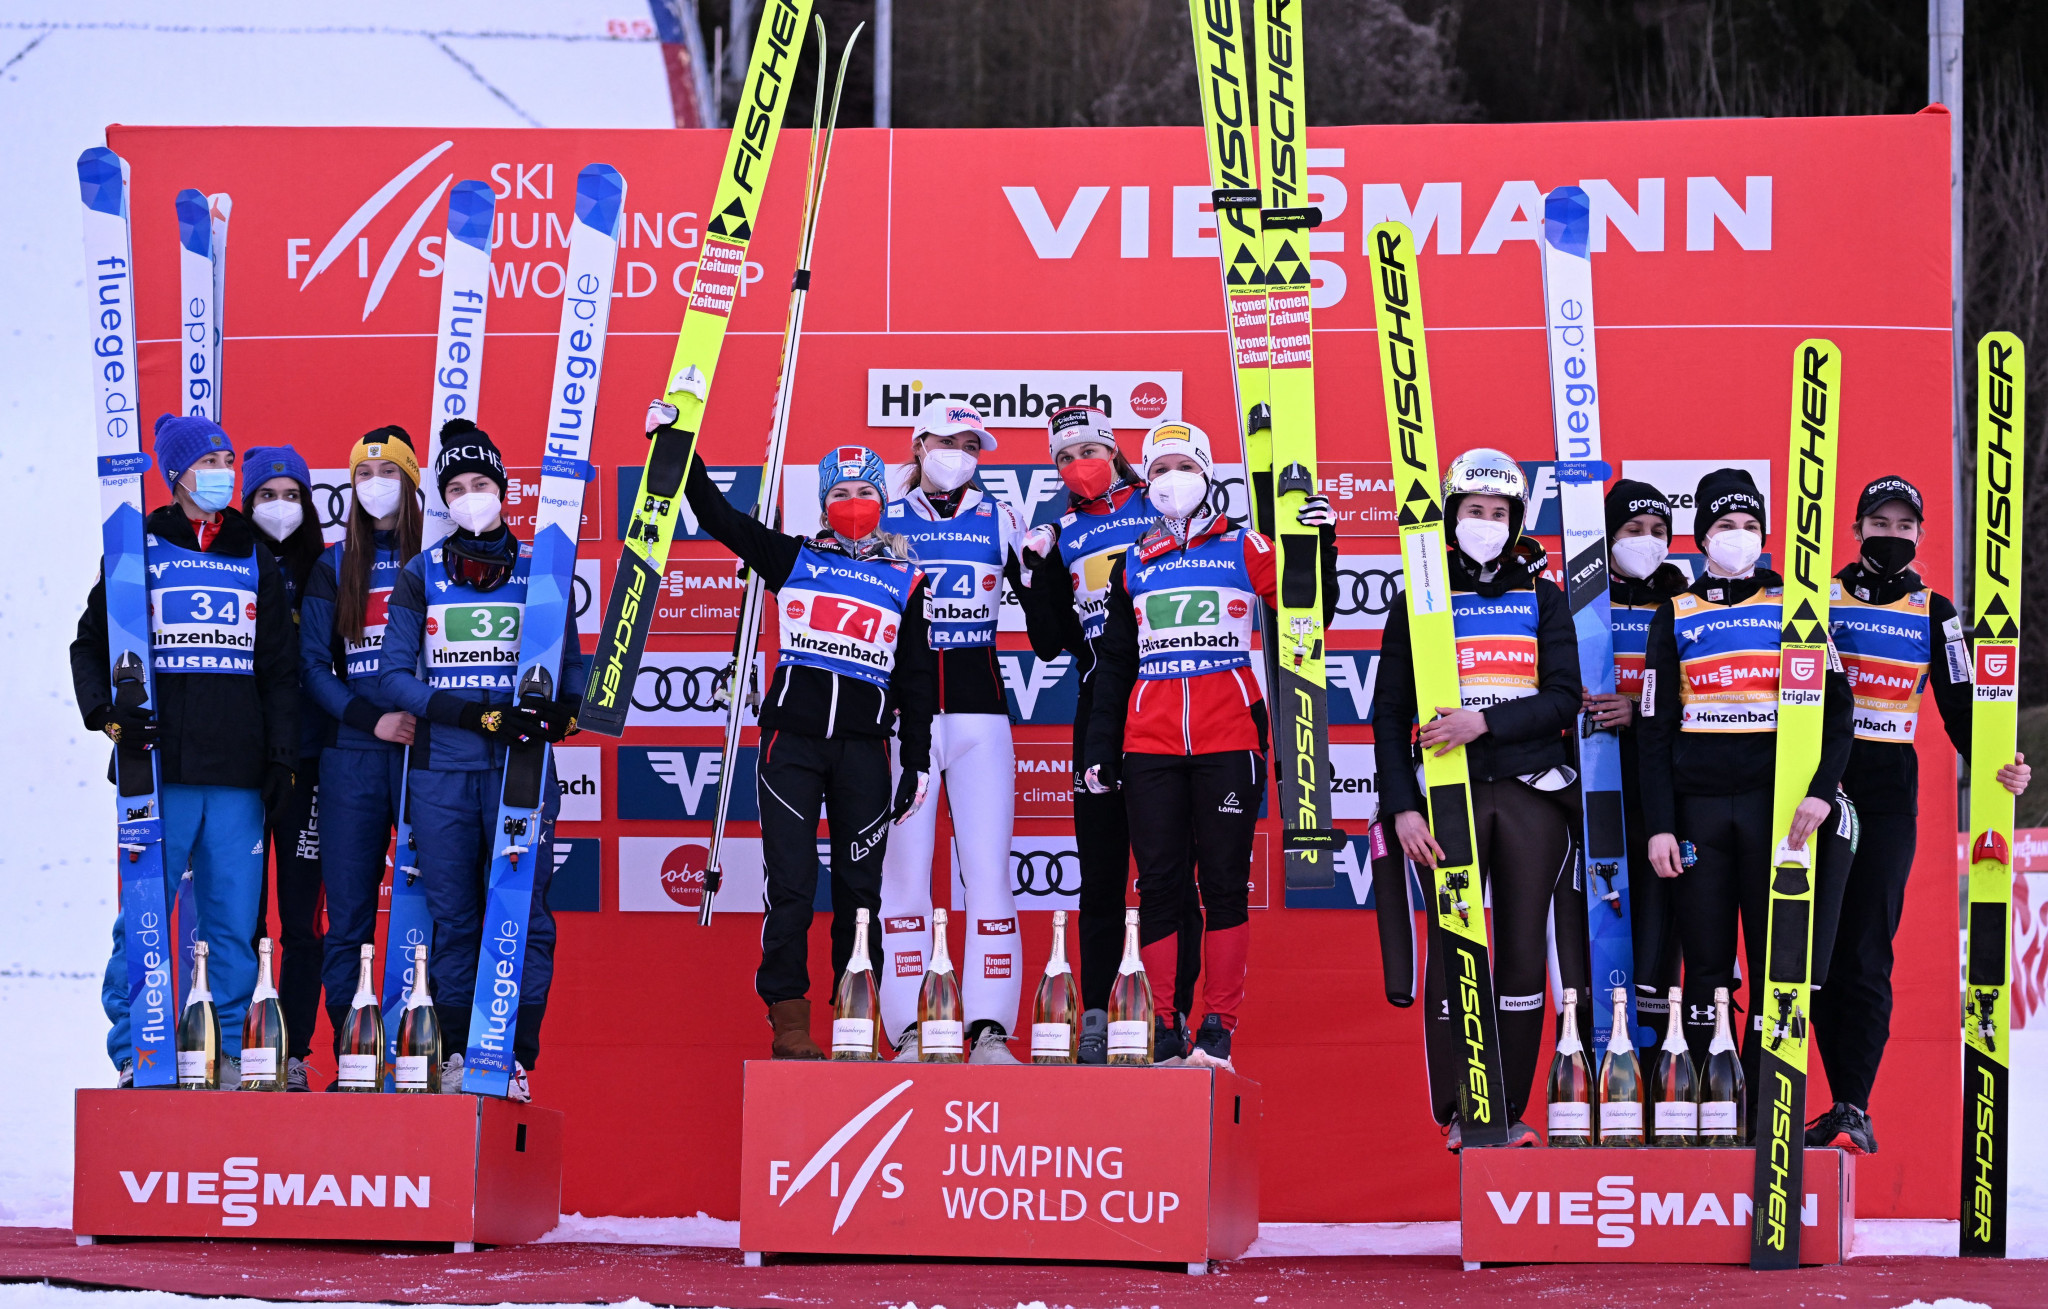 Austria triumphed on home snow in the women's team HS90 competition at the World Cup in Hinzenbach ©Getty Images 